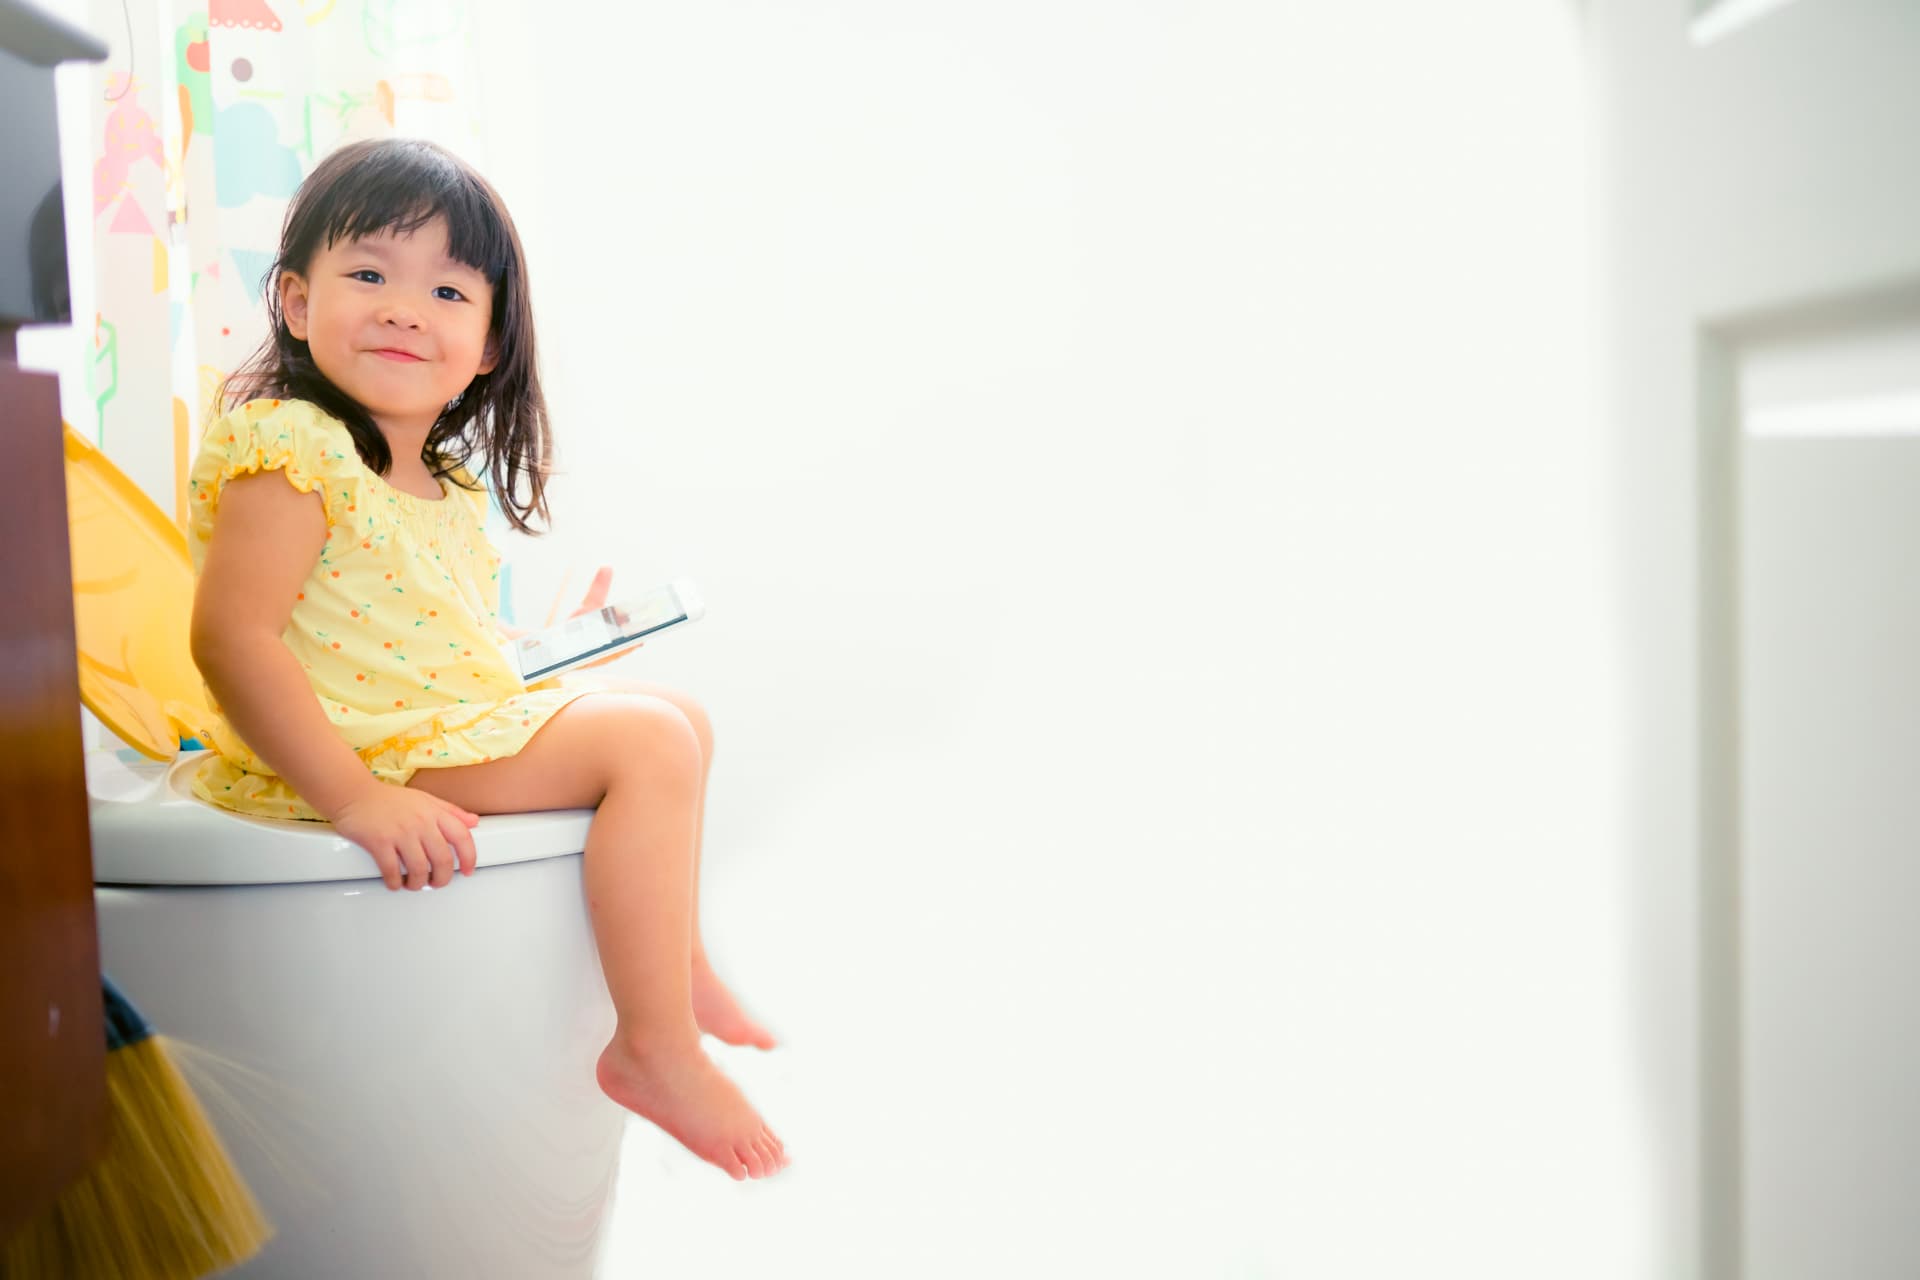 How to potty train a girl: Tips and advice